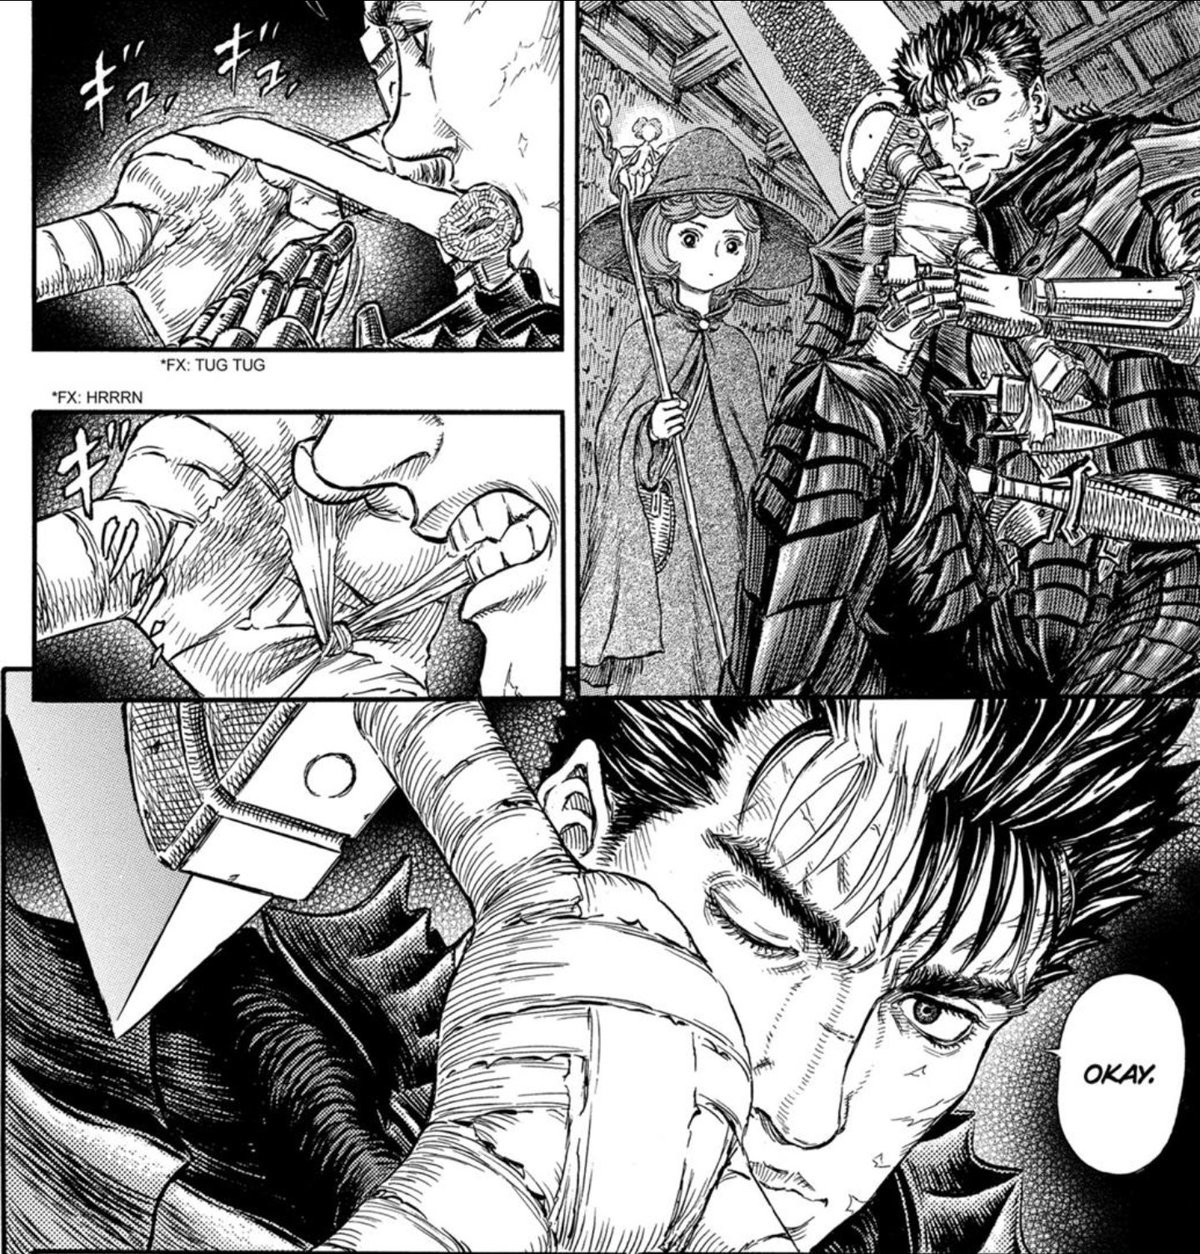 Guts. .. &gt;uses teeth to tighten bandage &gt;probably due to prosthetic being unable to do so with dexterity Small like this really kinda puts into perspective how Gut